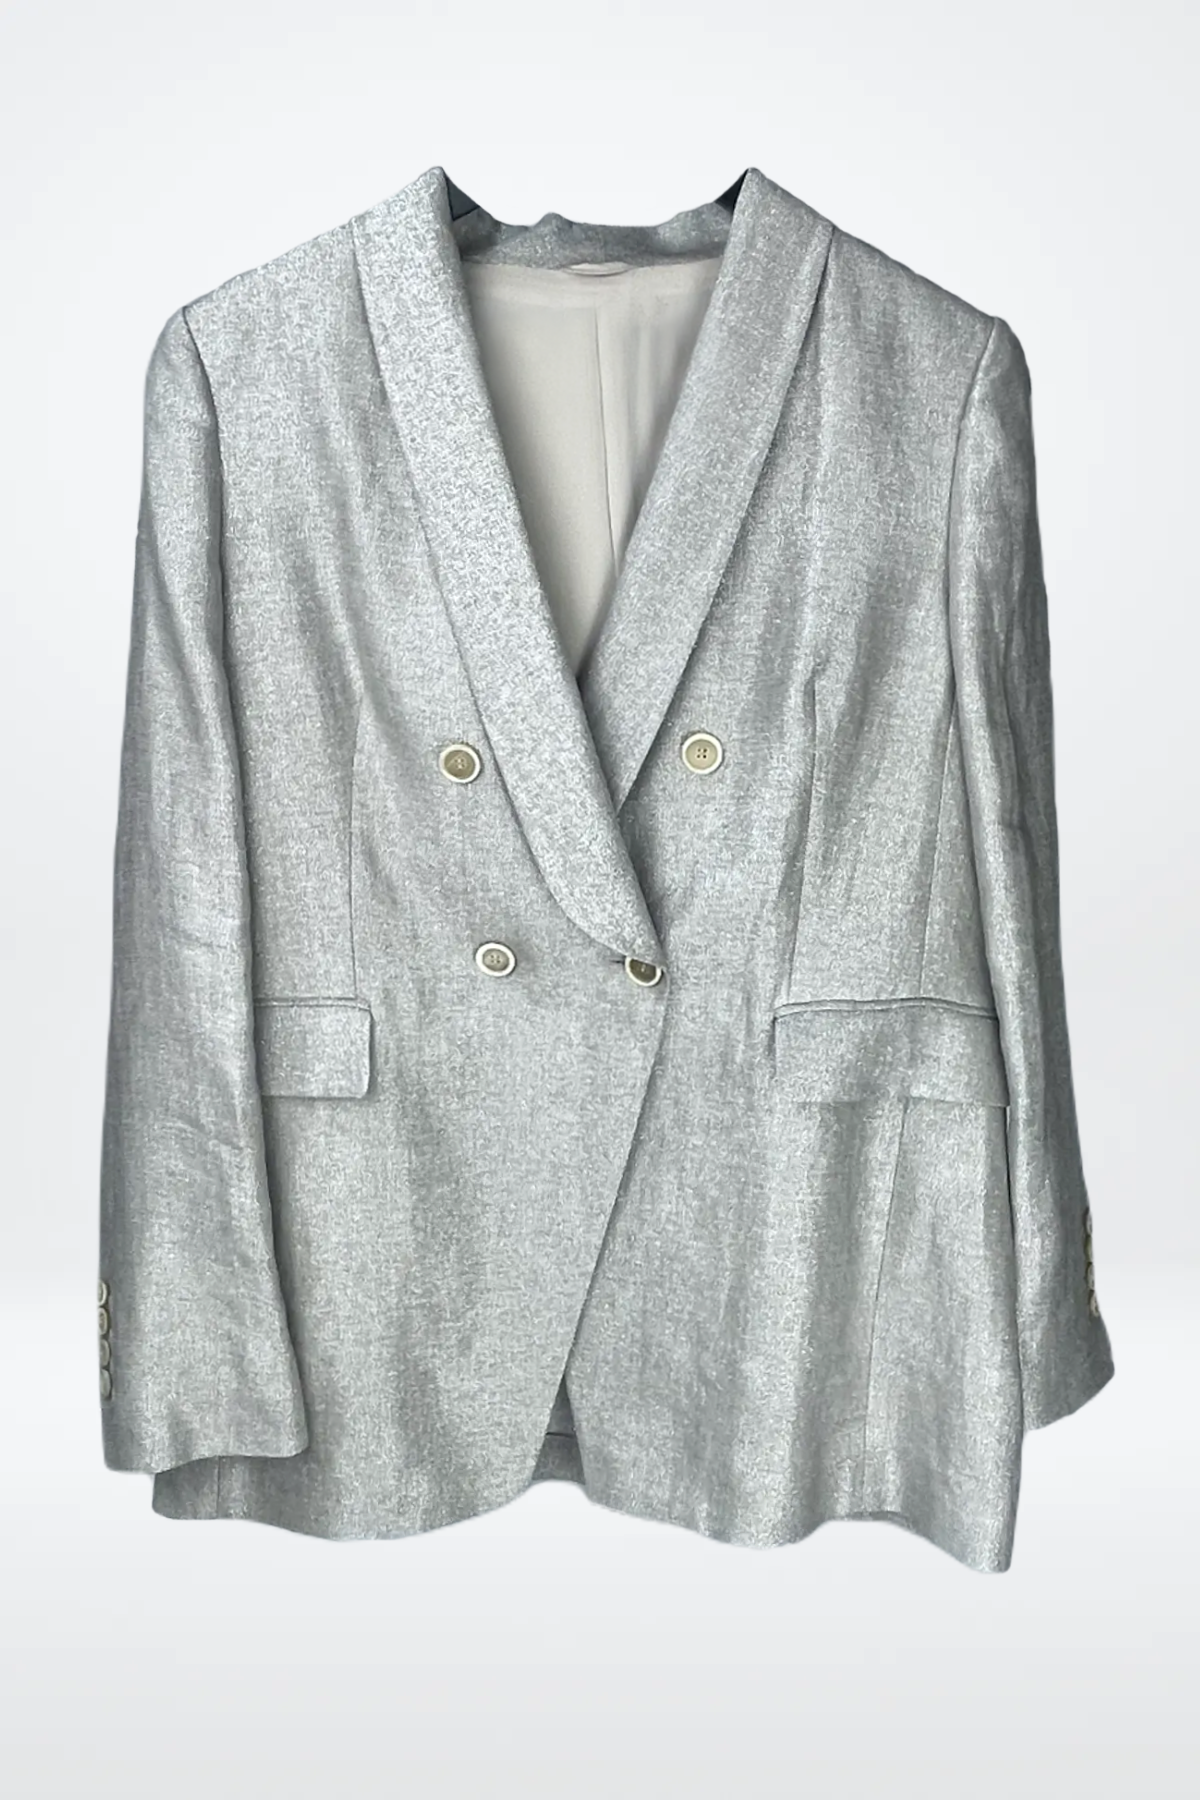 Brunello Cucinelli Shimmered Linen Double-Breasted Blazer Jacket NWT